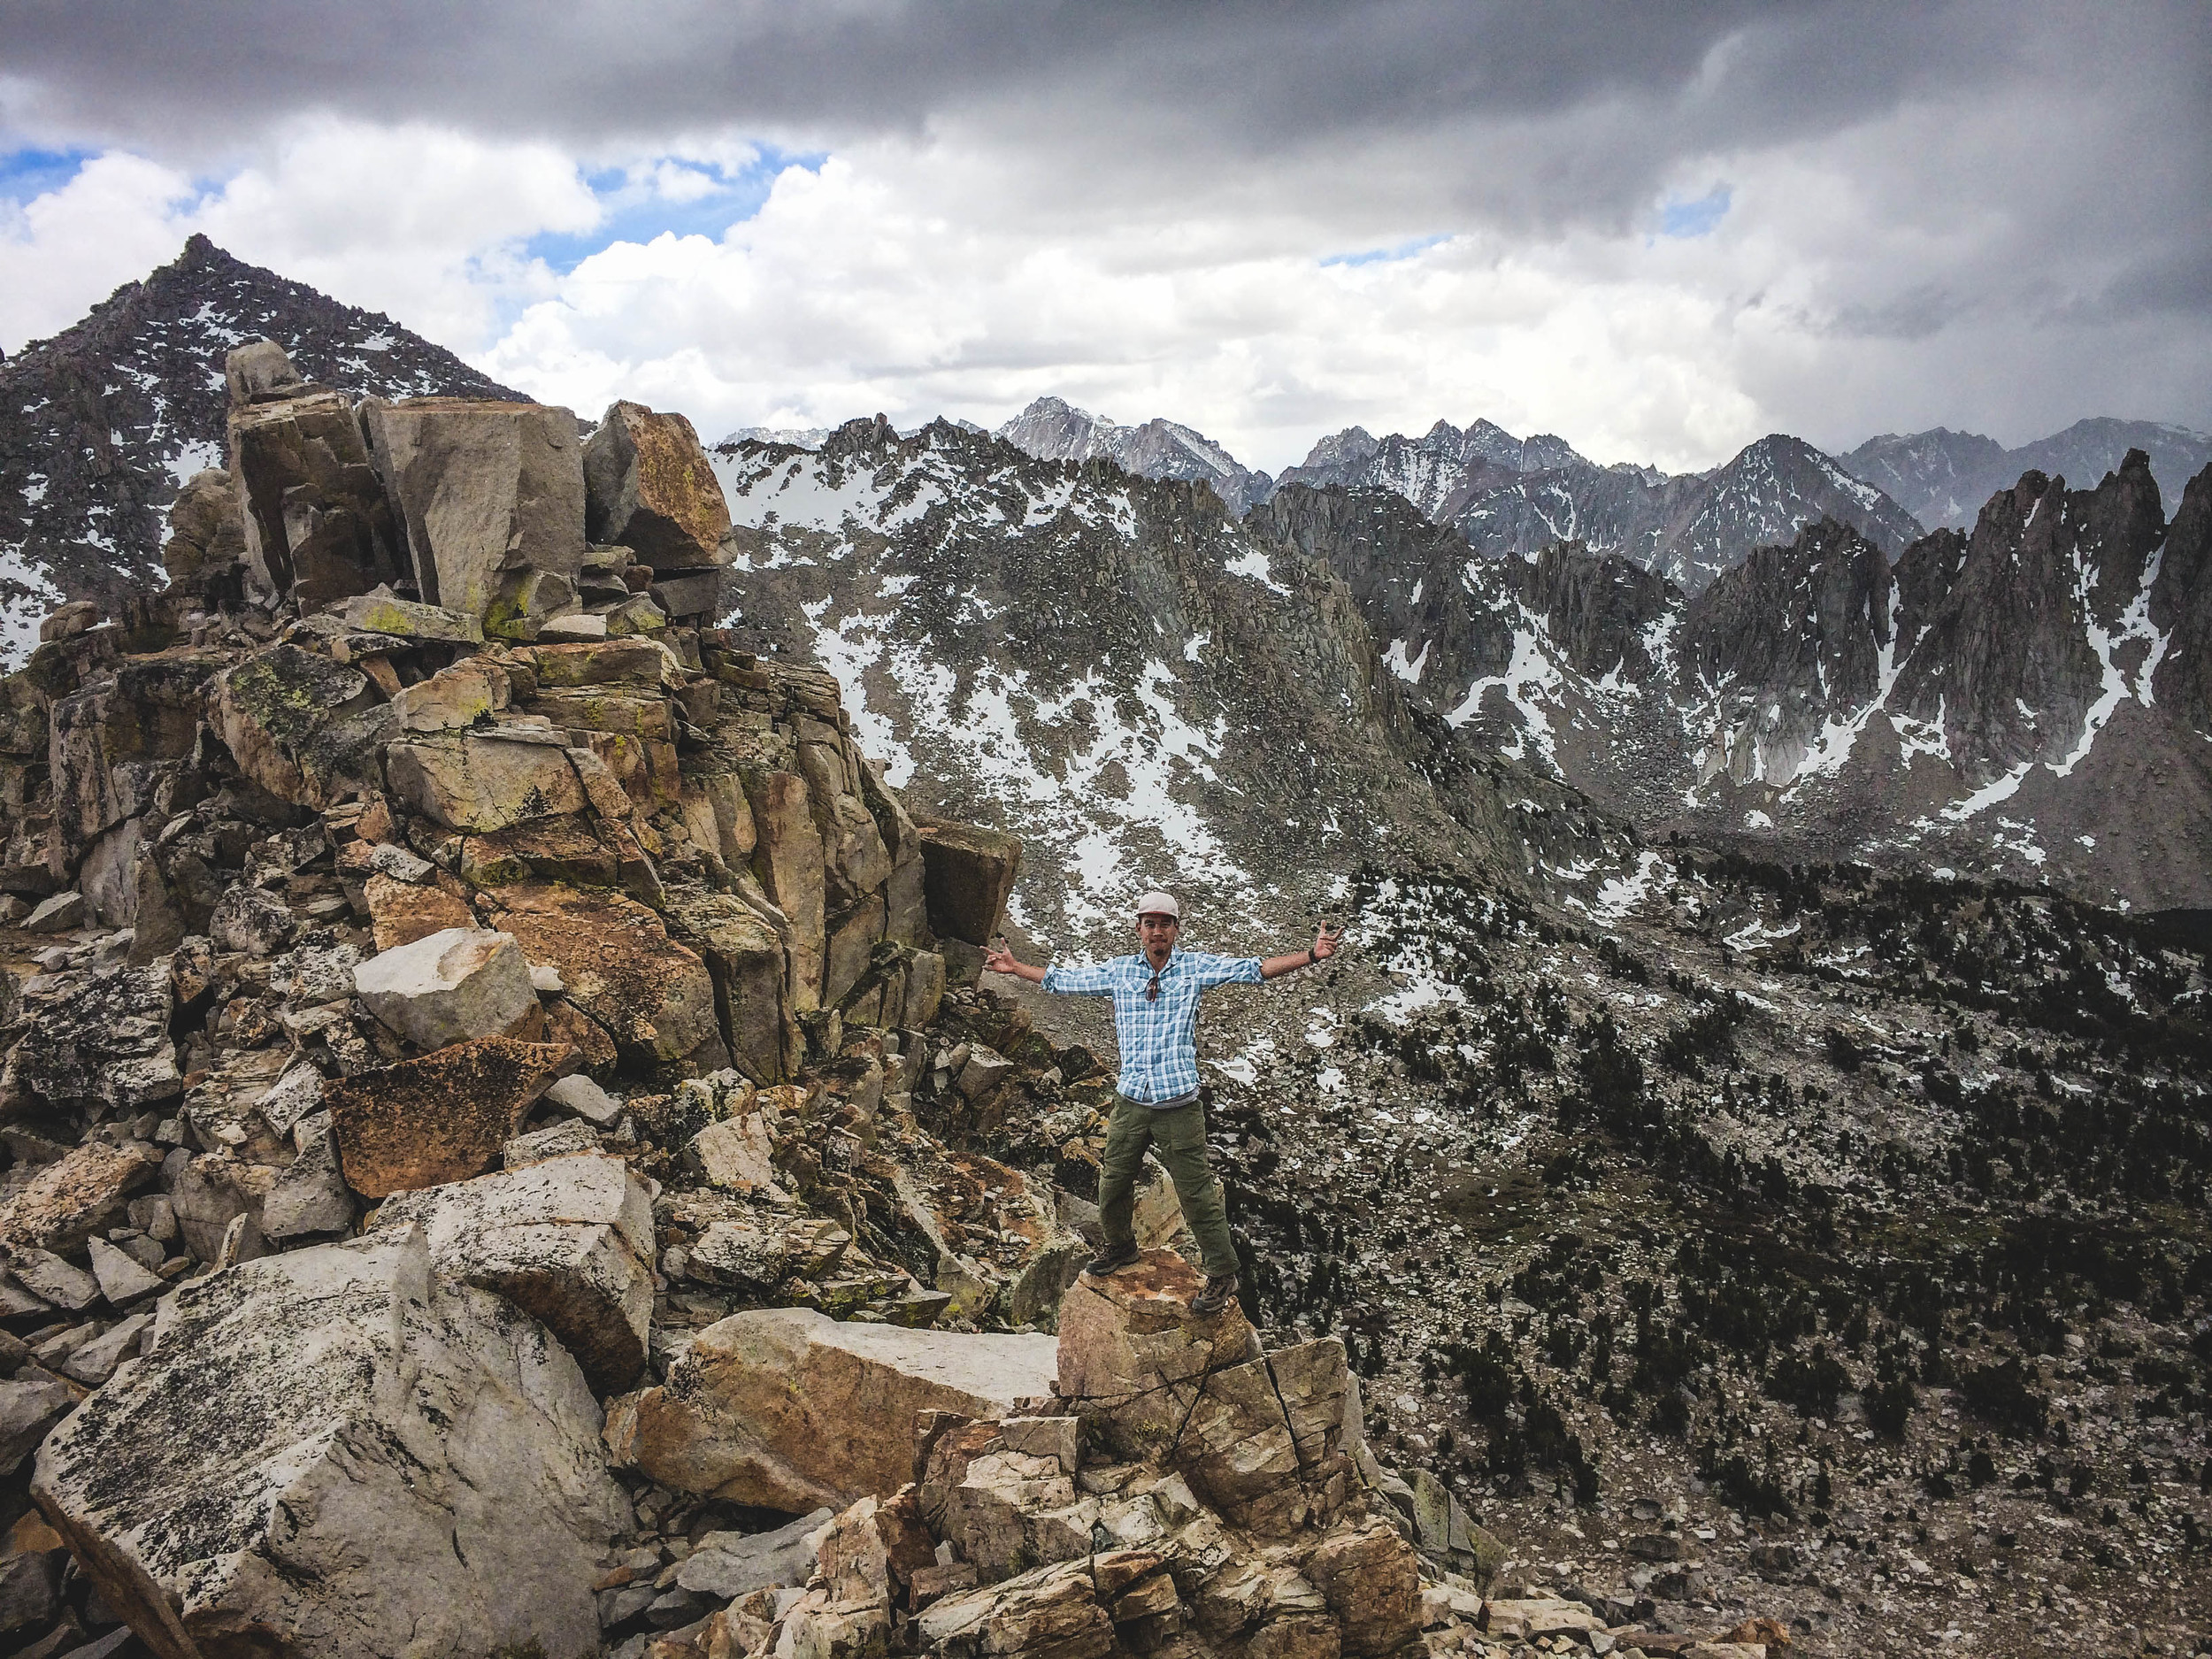   Kearsarge Pass  |  silliness at 11,709 ft.&nbsp; Big Pothole Lake&nbsp; to the left,&nbsp; King's Canyon&nbsp; to the right.&nbsp;  